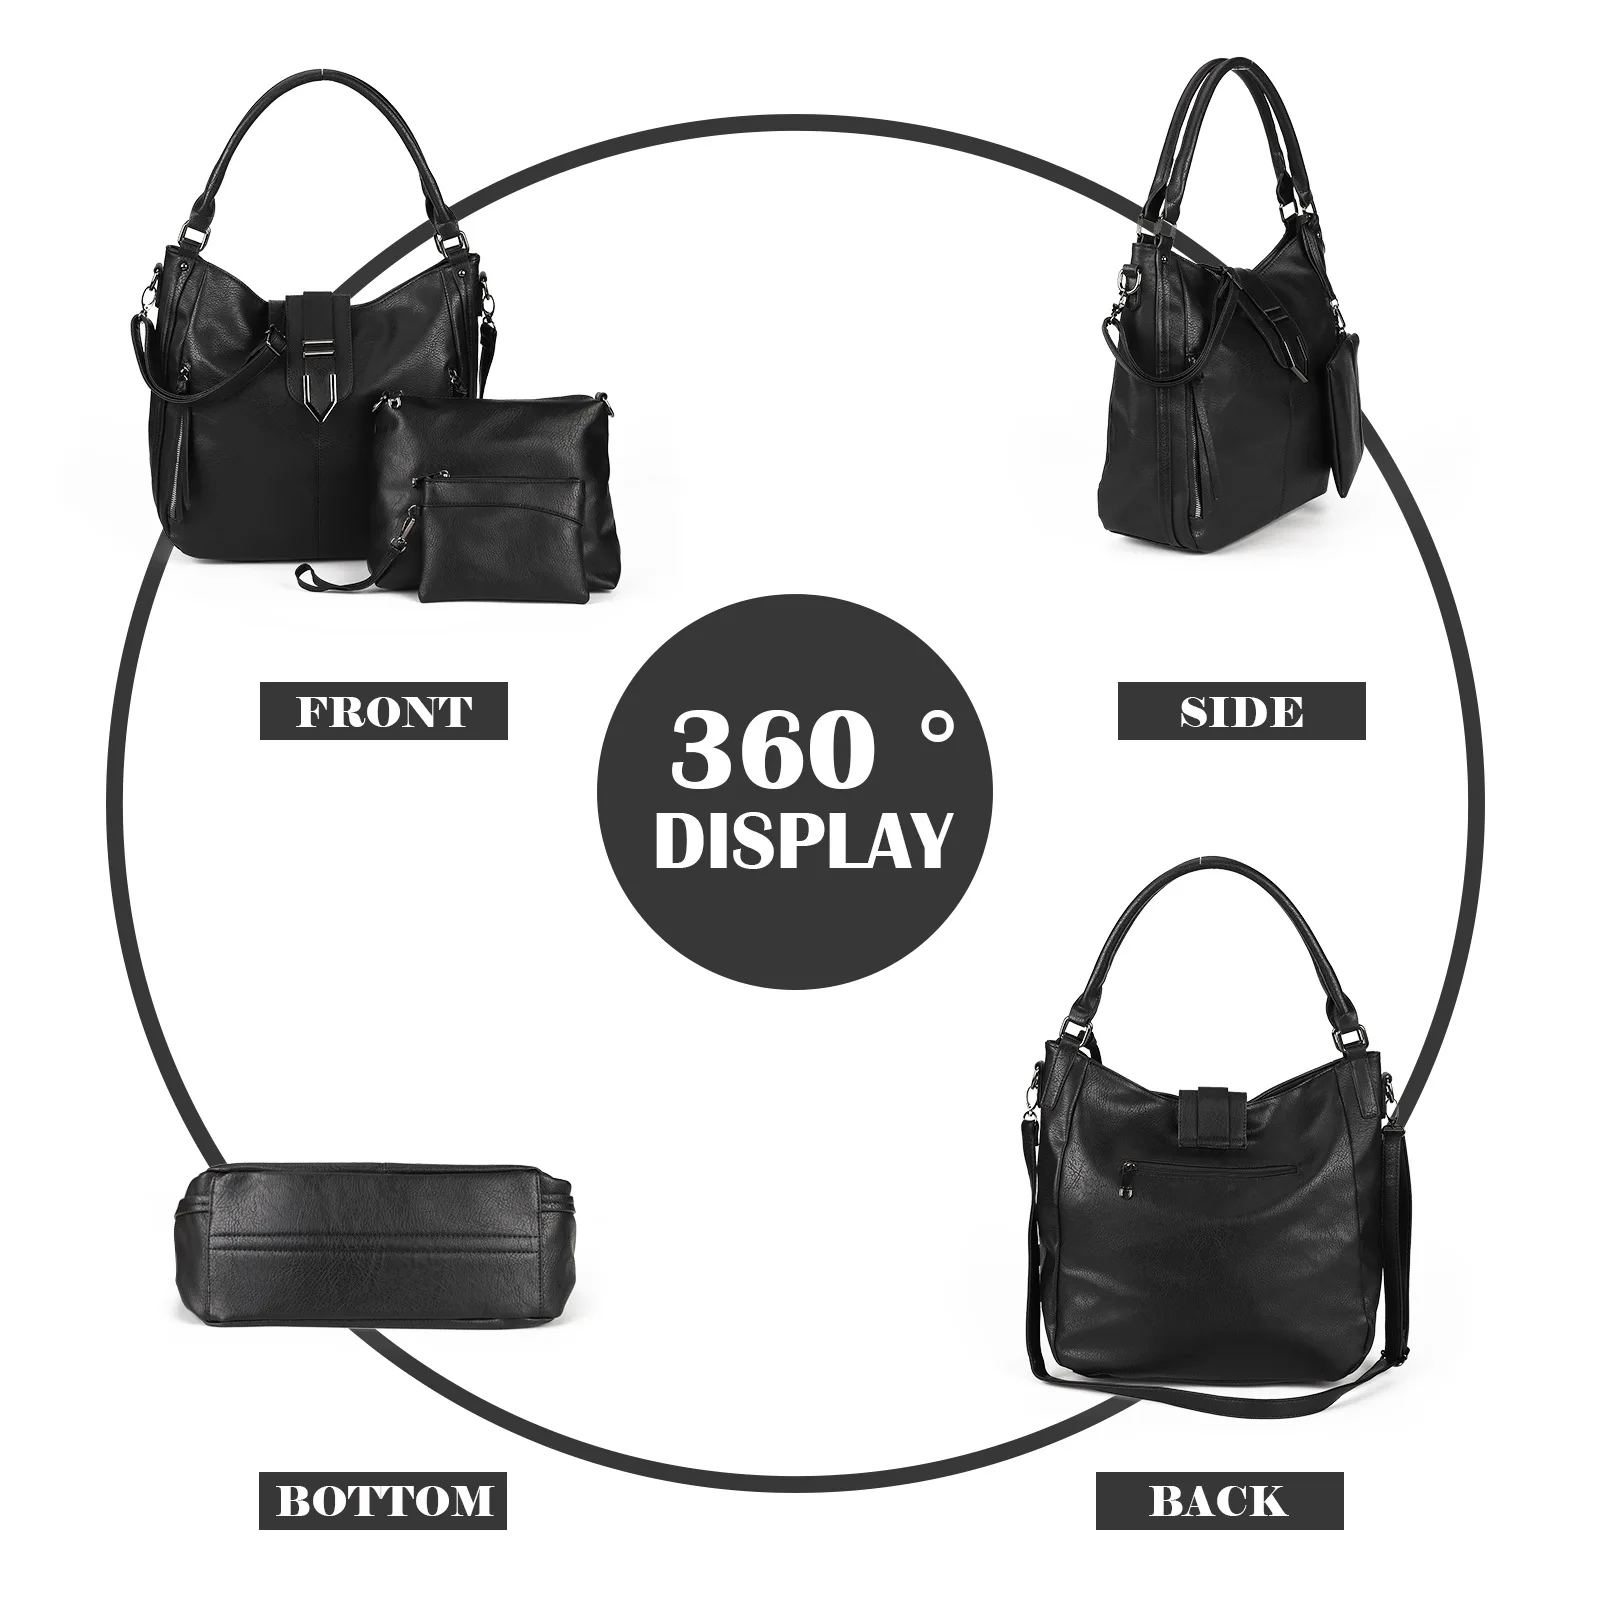 SCOFY FASHION 3 Pieces Set Tote Bags for Women Luxury Soft PU Leather Purses and Handbags Chic Leisure Crossbody Shoulder Bag best Women's Bags